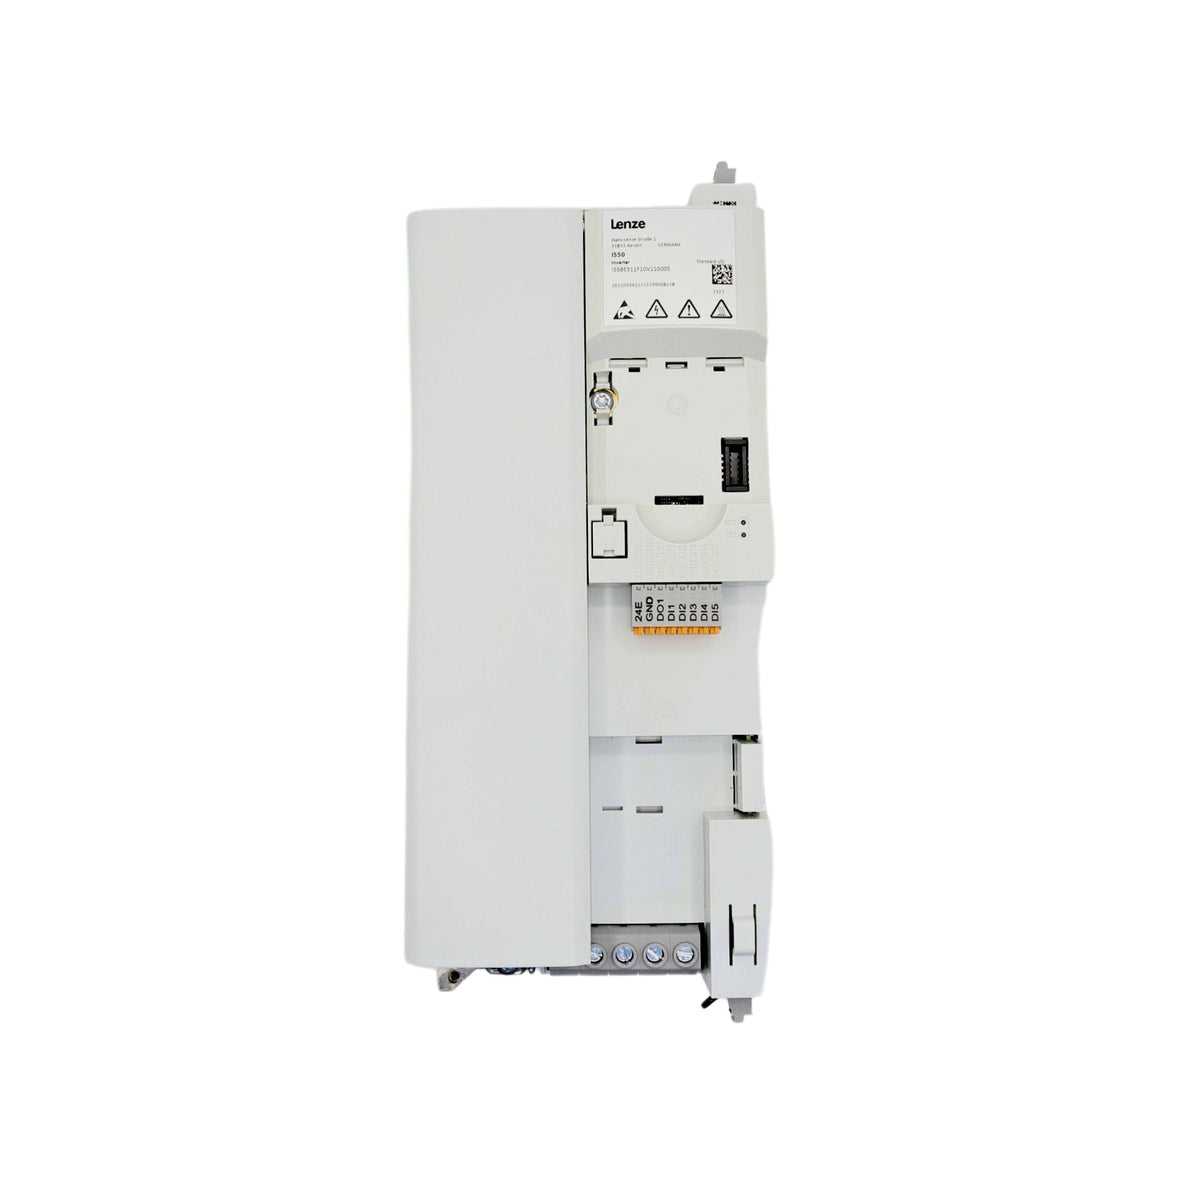 Lenze | i550 15hp Cabinet mount, fieldbus and STO capable, 480volt 5digital inputs, 2 analog inputs, 1 digital output 1 analog Output, 1 relay | I55BE311F10V11000S - front view